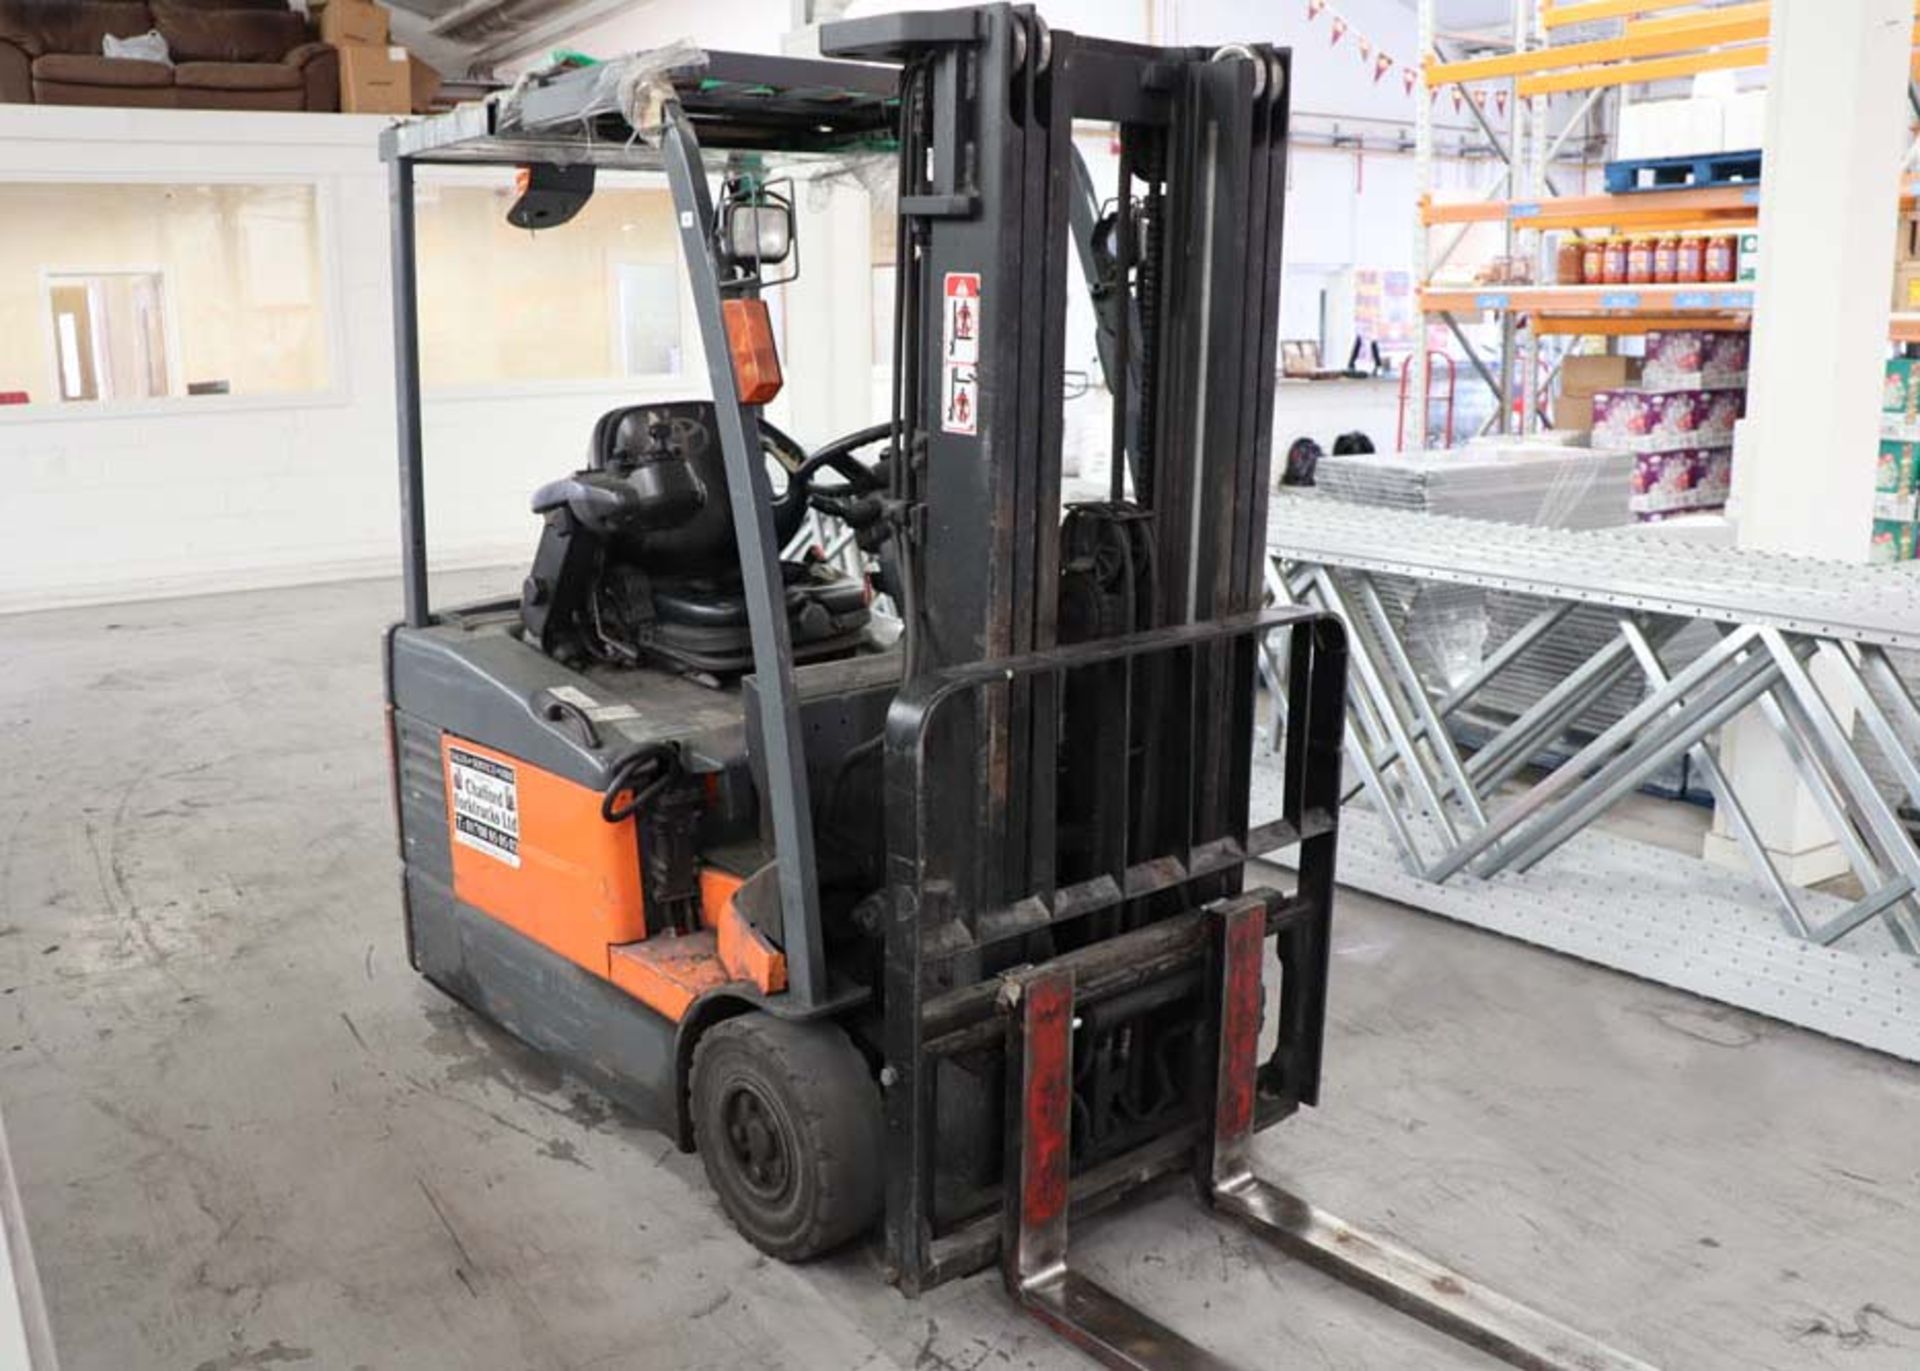 TOYOTA model E811 electric counterbalance forklift truck, 2007, capacity 1500kg with triple mast and - Image 10 of 13